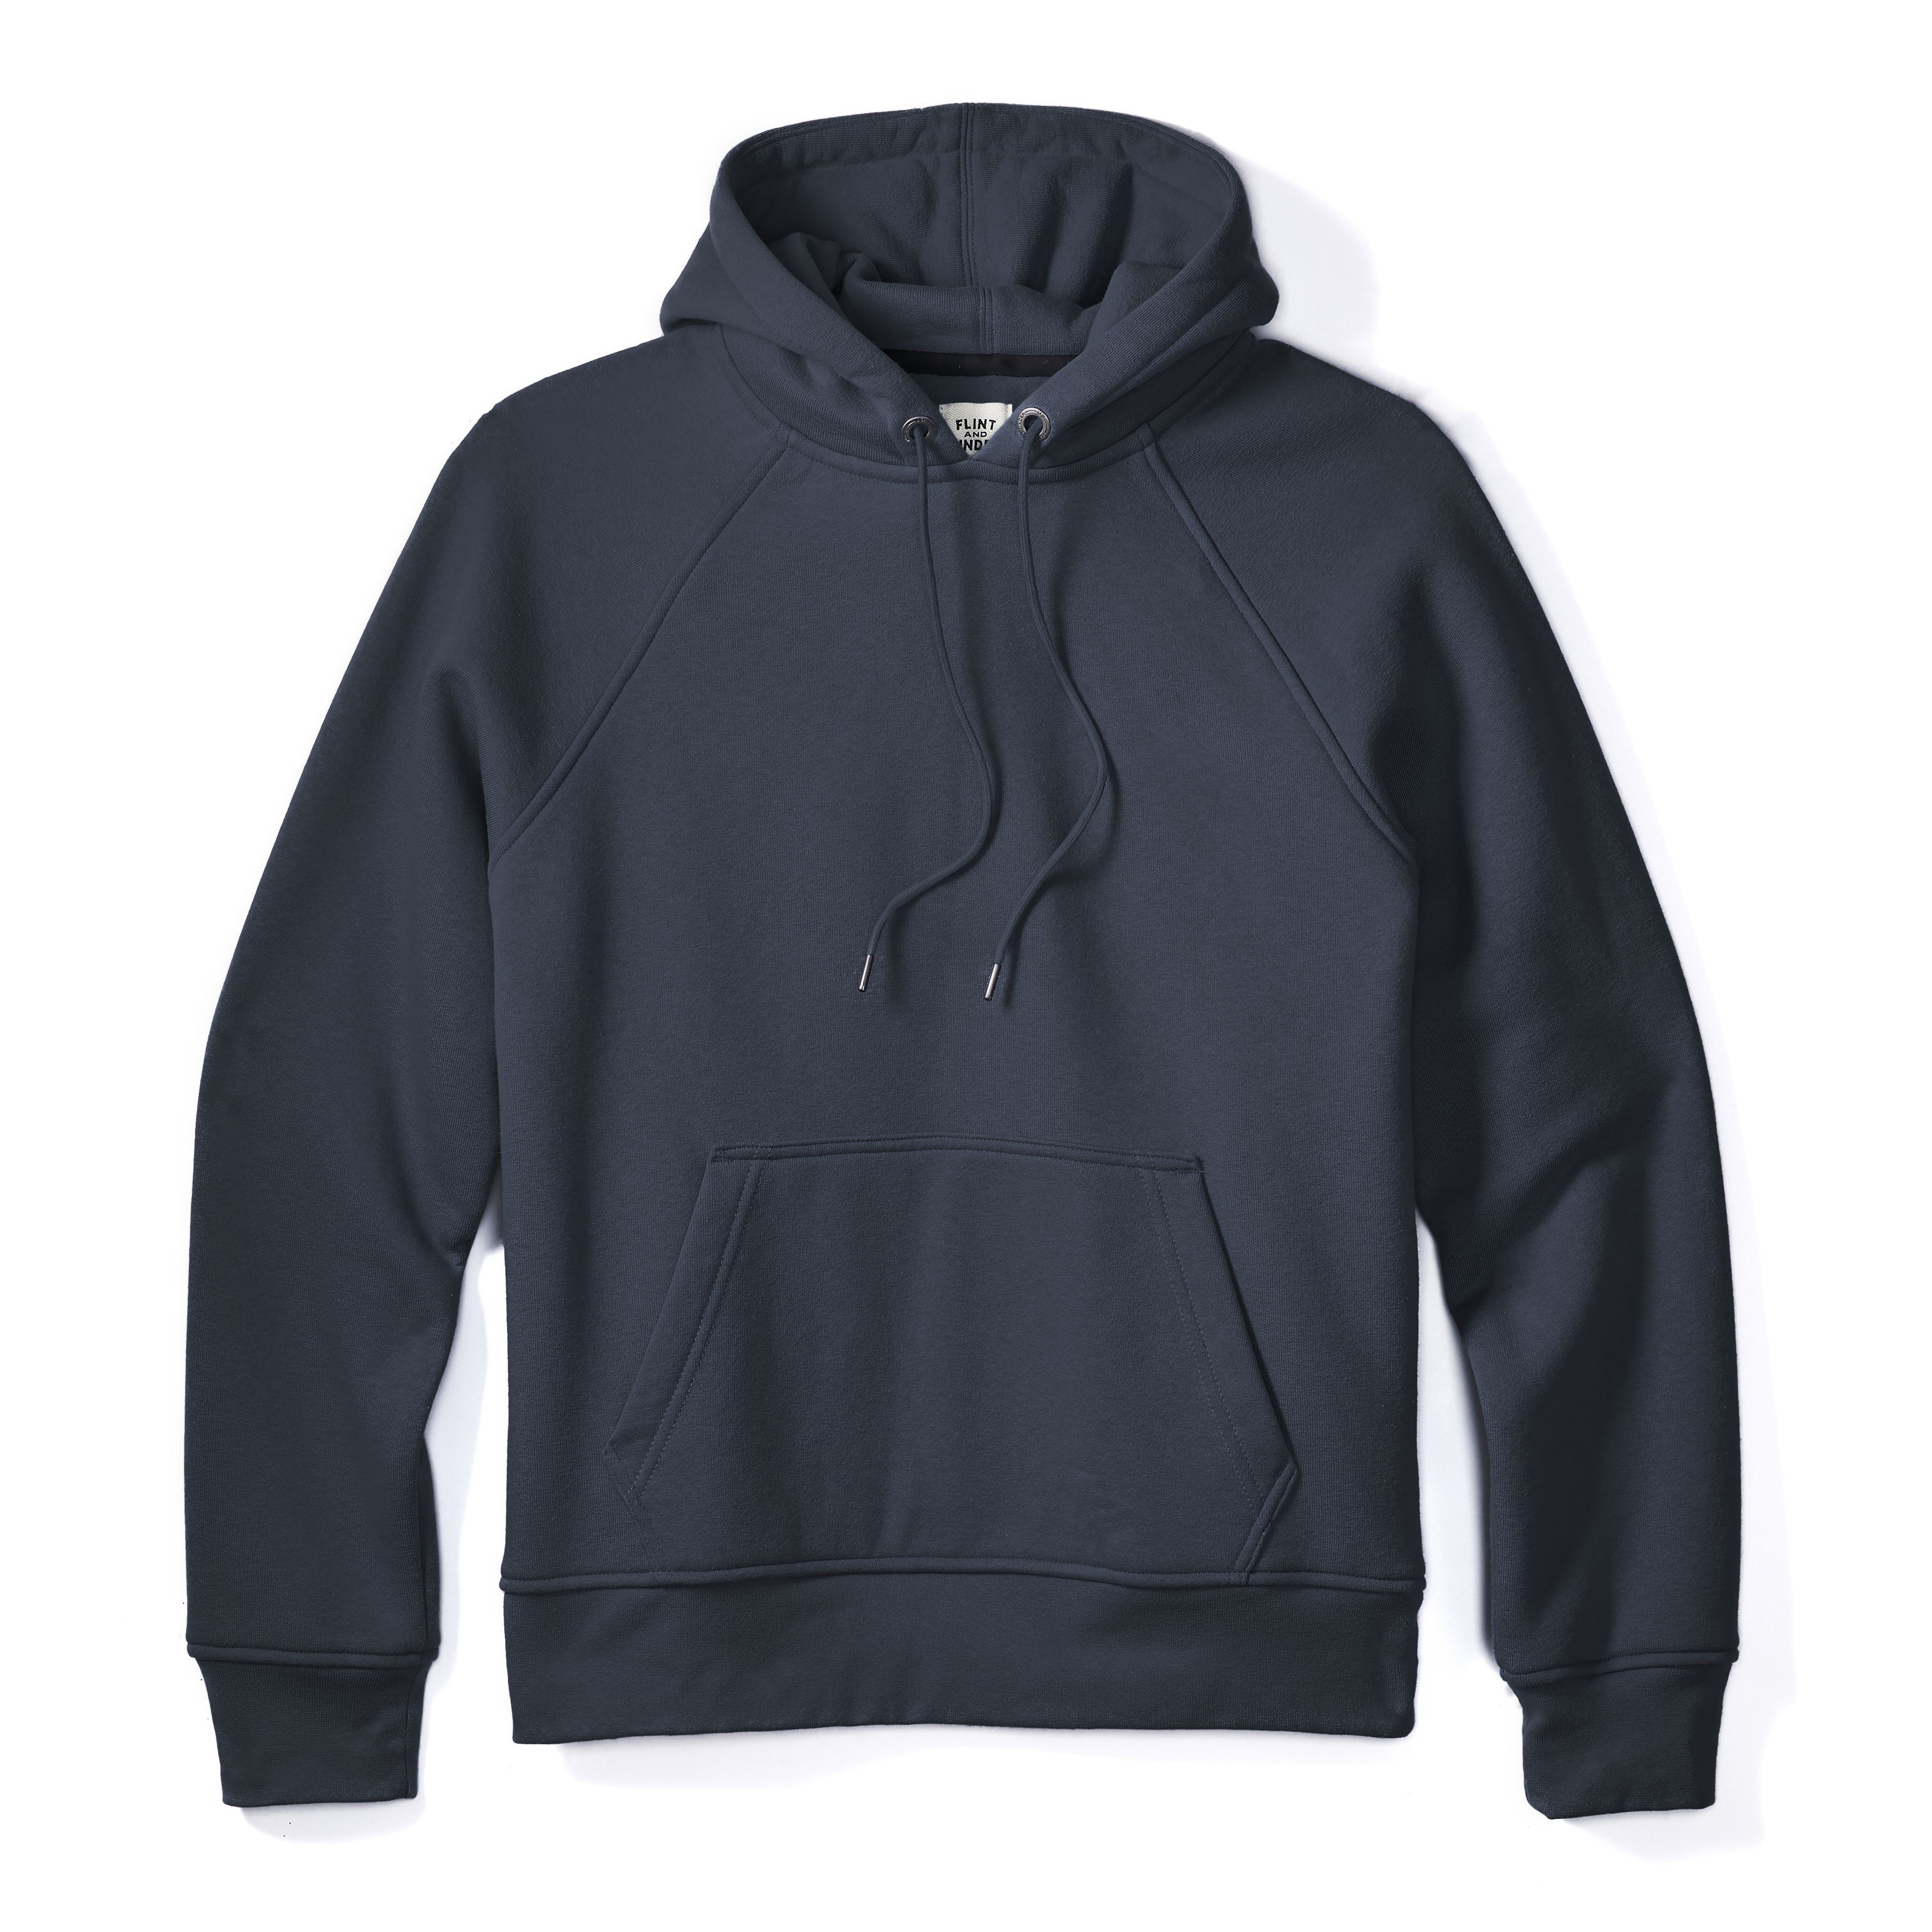 Thick High Quality Hoodies Best Sale, UP TO 54% OFF | www.rupit.com